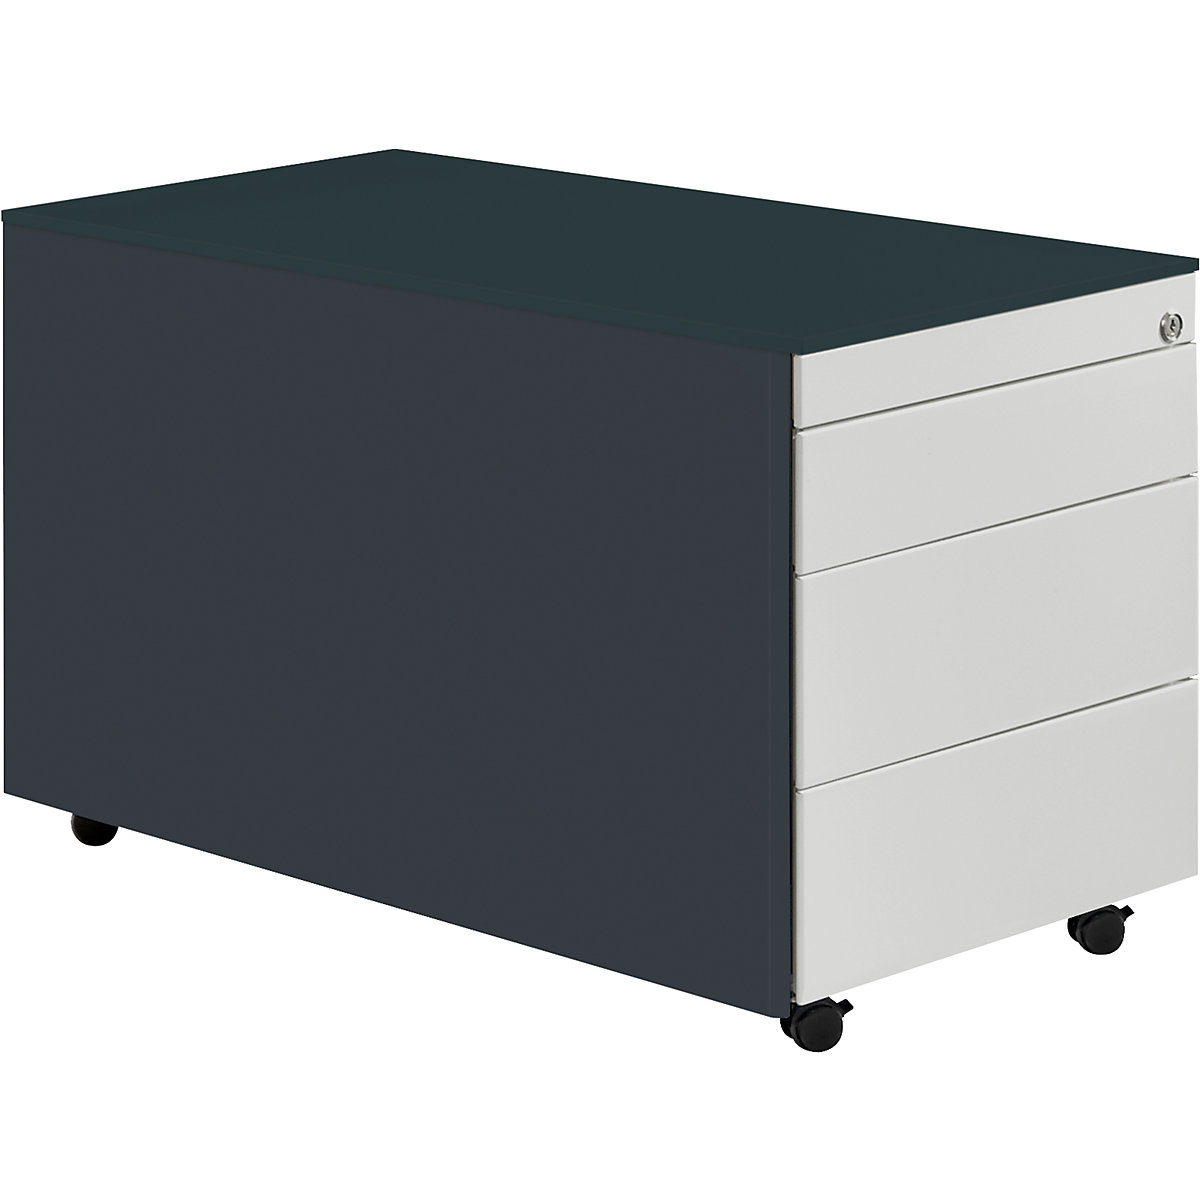 Drawer pedestal with castors – mauser, HxD 520 x 800 mm, steel top, 3 drawers, charcoal / light grey / charcoal-3